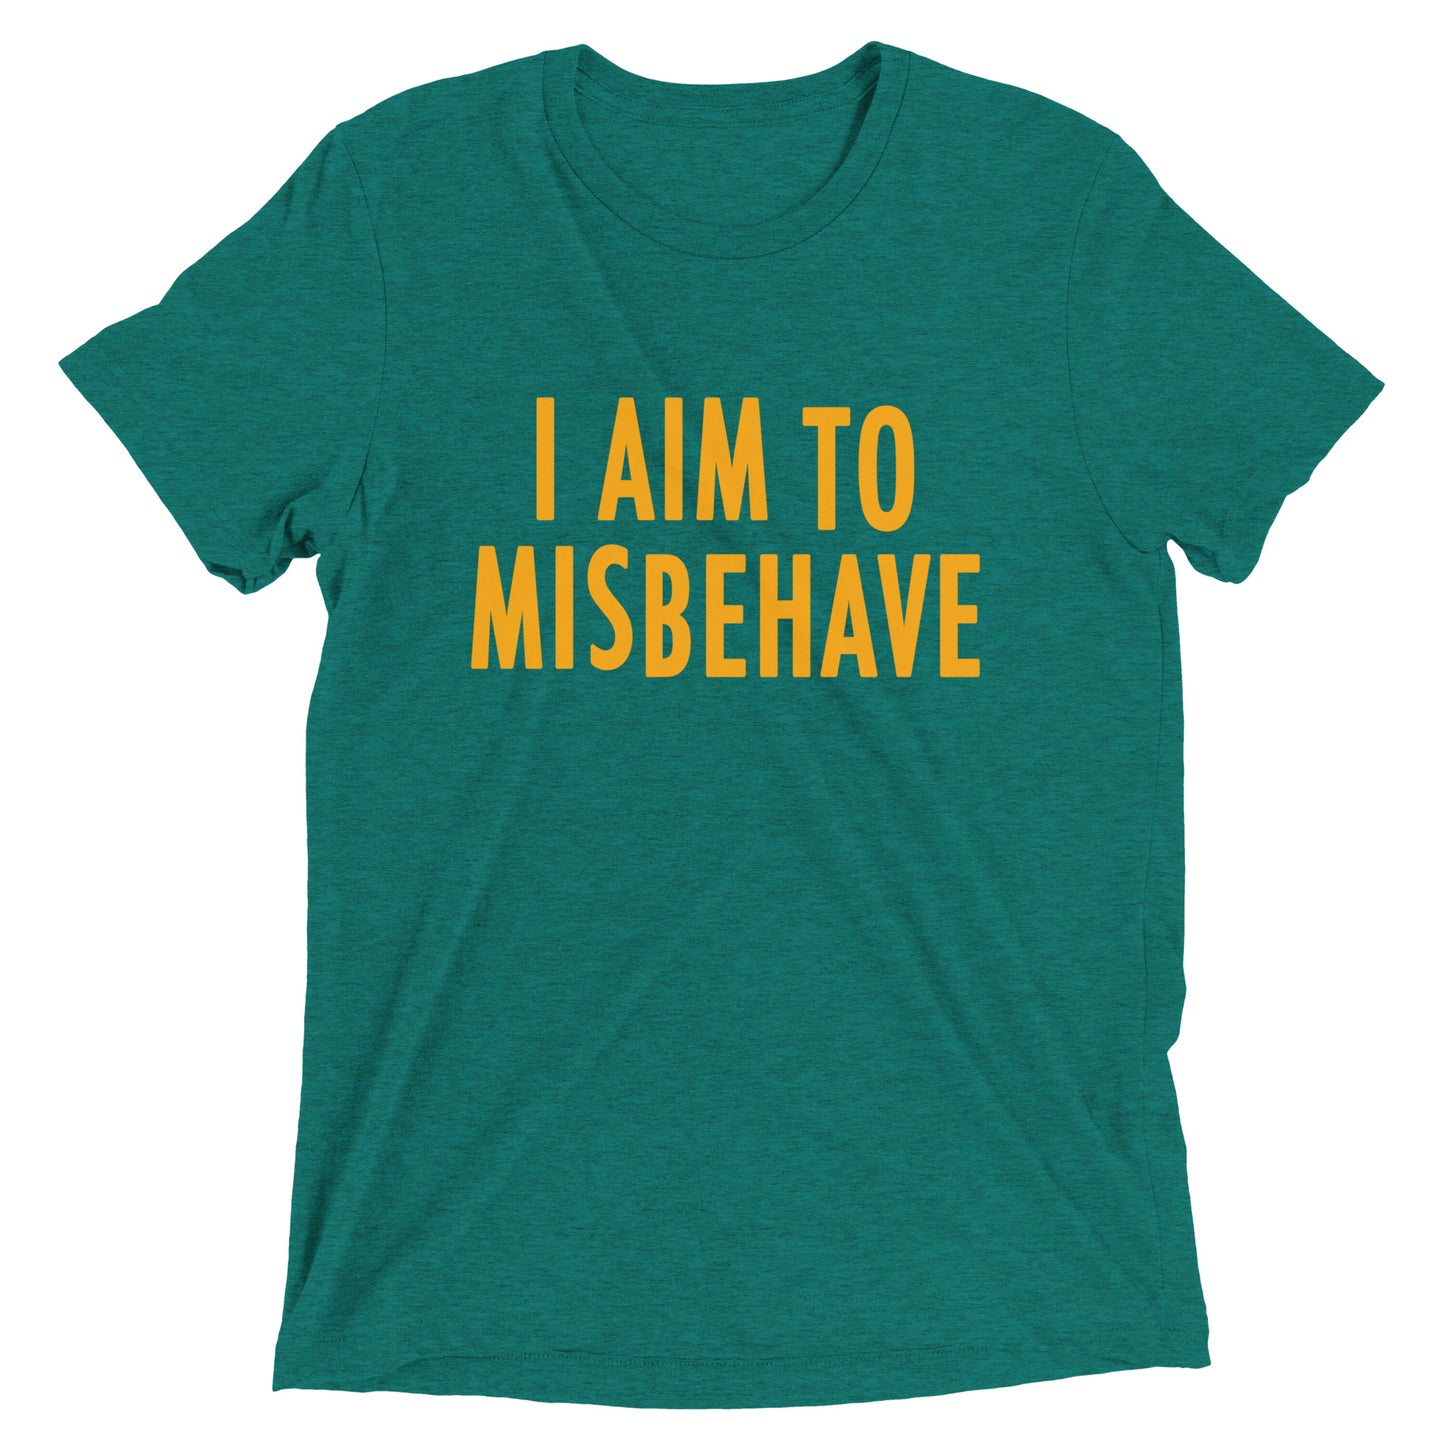 I Aim To Misbehave Men's Tri-Blend Tee